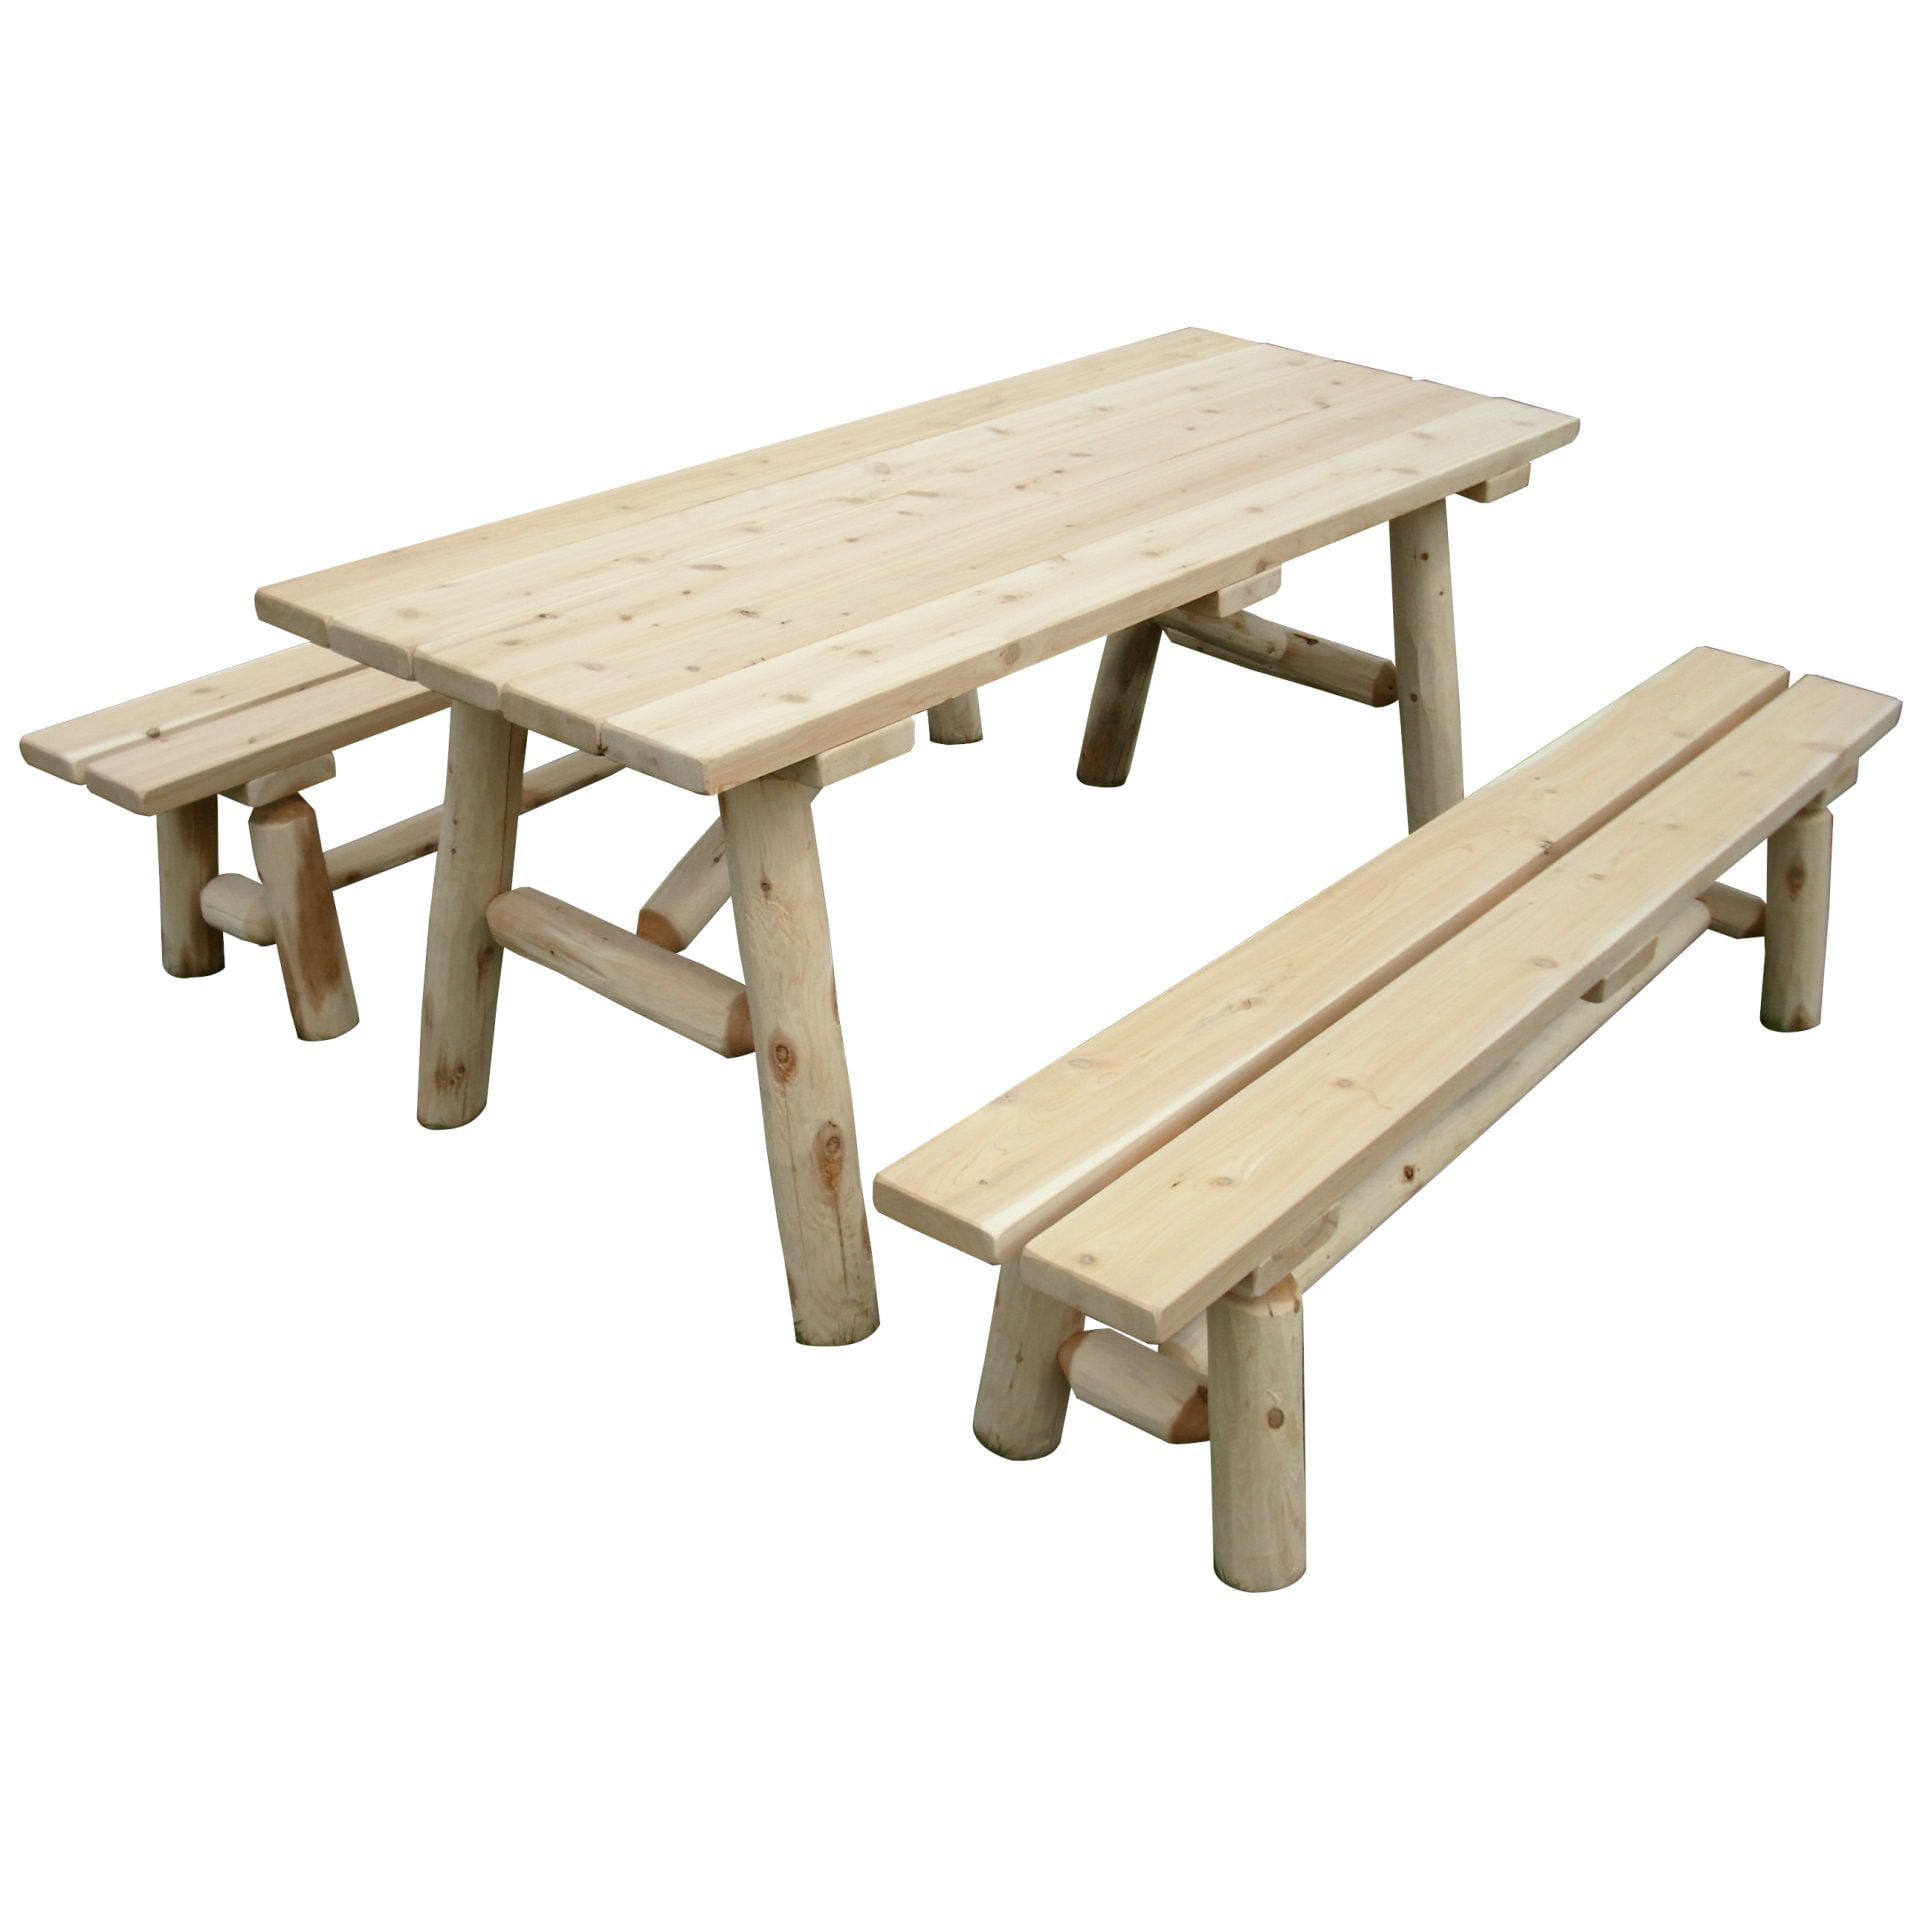 White Cedar Log Picnic Table with Detached Benches